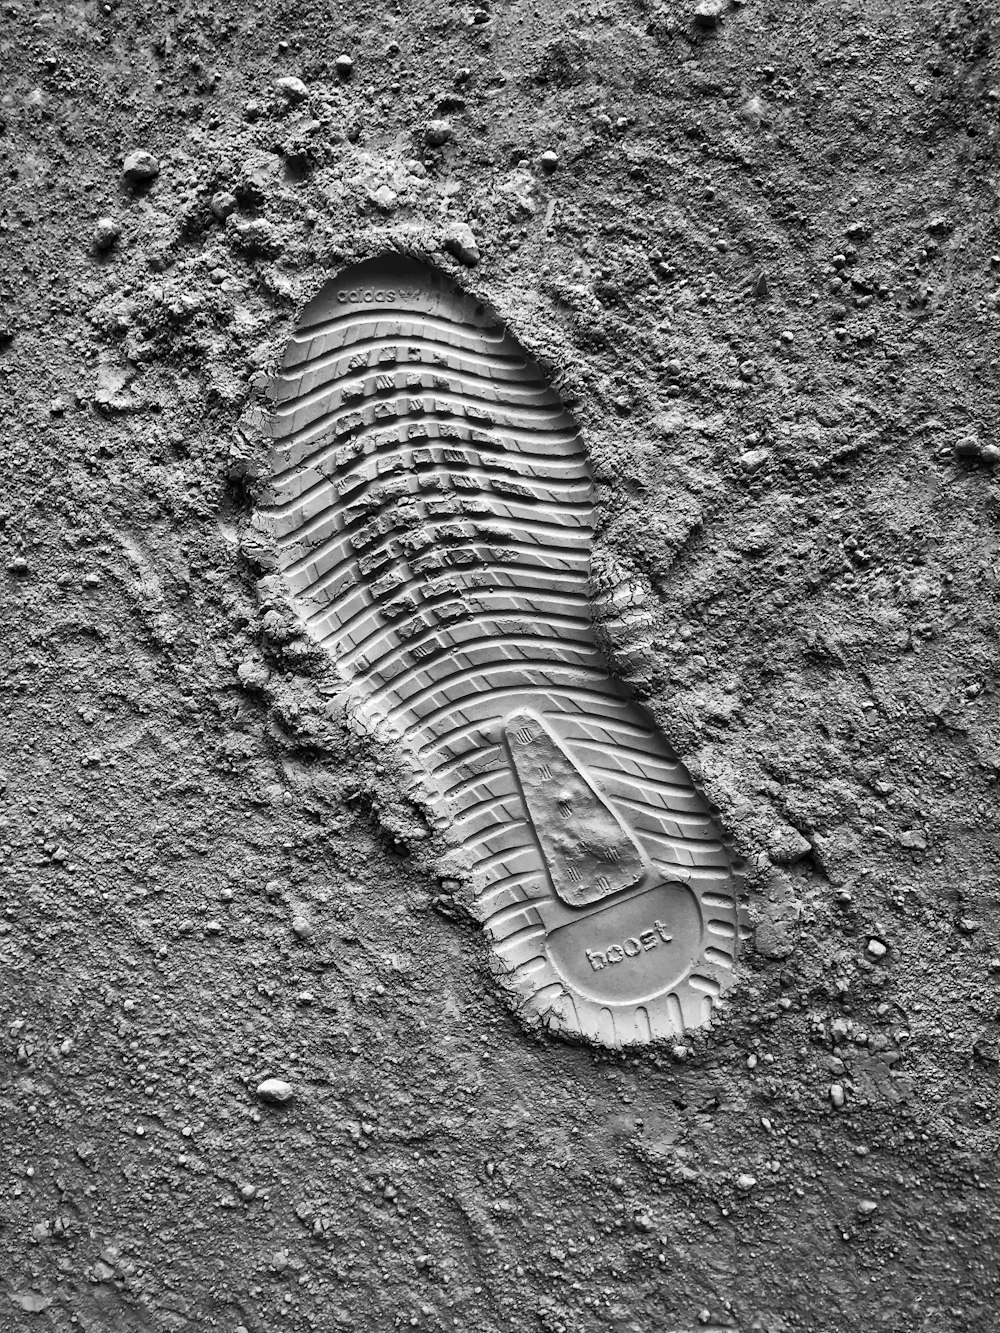 grayscale photo of sneaker sole print